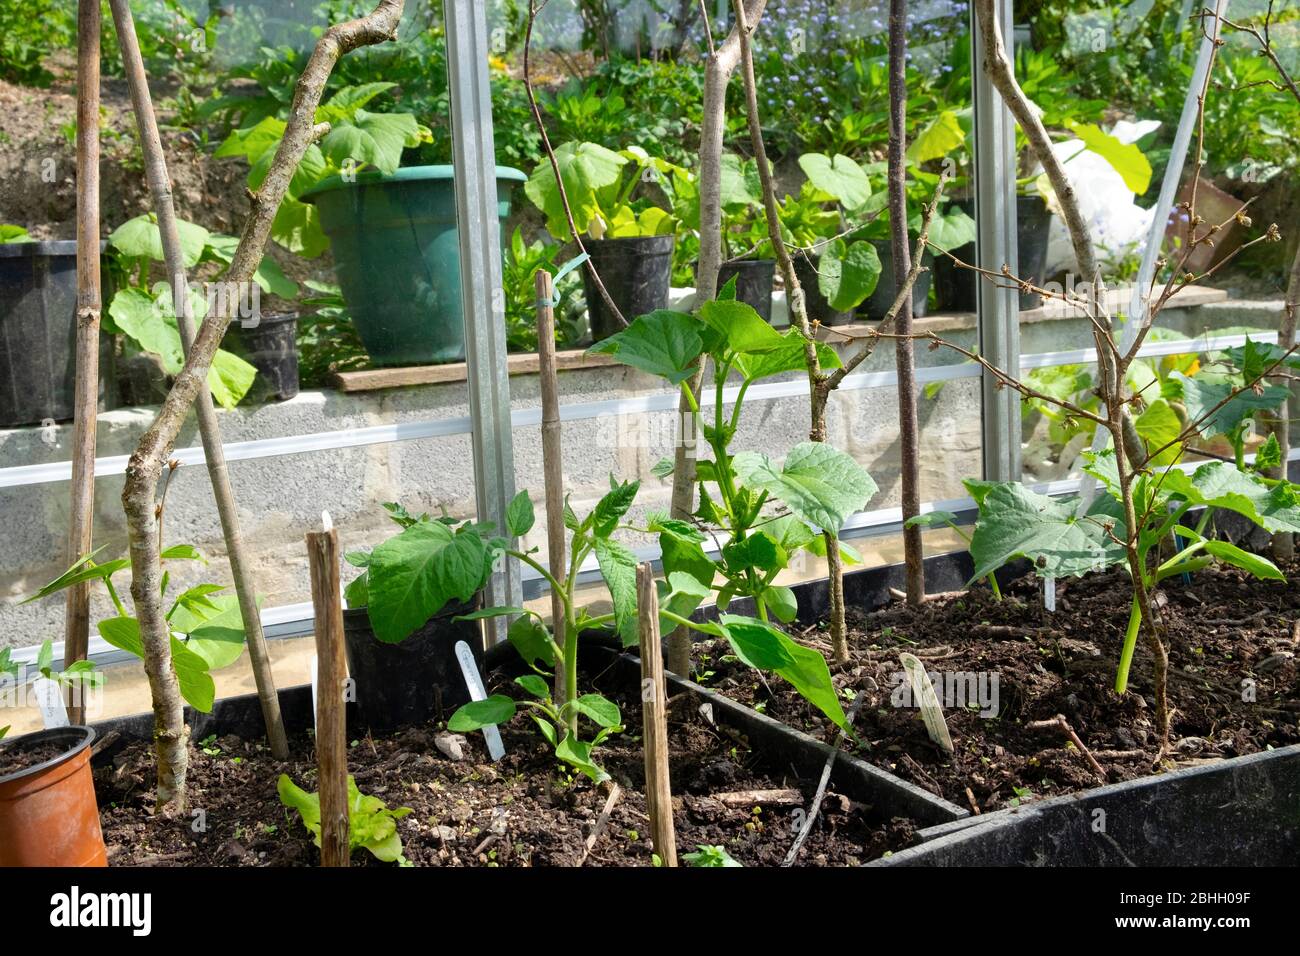 Cucumber plants growing inside a greenhouse in April with squash and courgette plants hardening off outside in pots in spring Wales UK. KATHY DEWITT Stock Photo